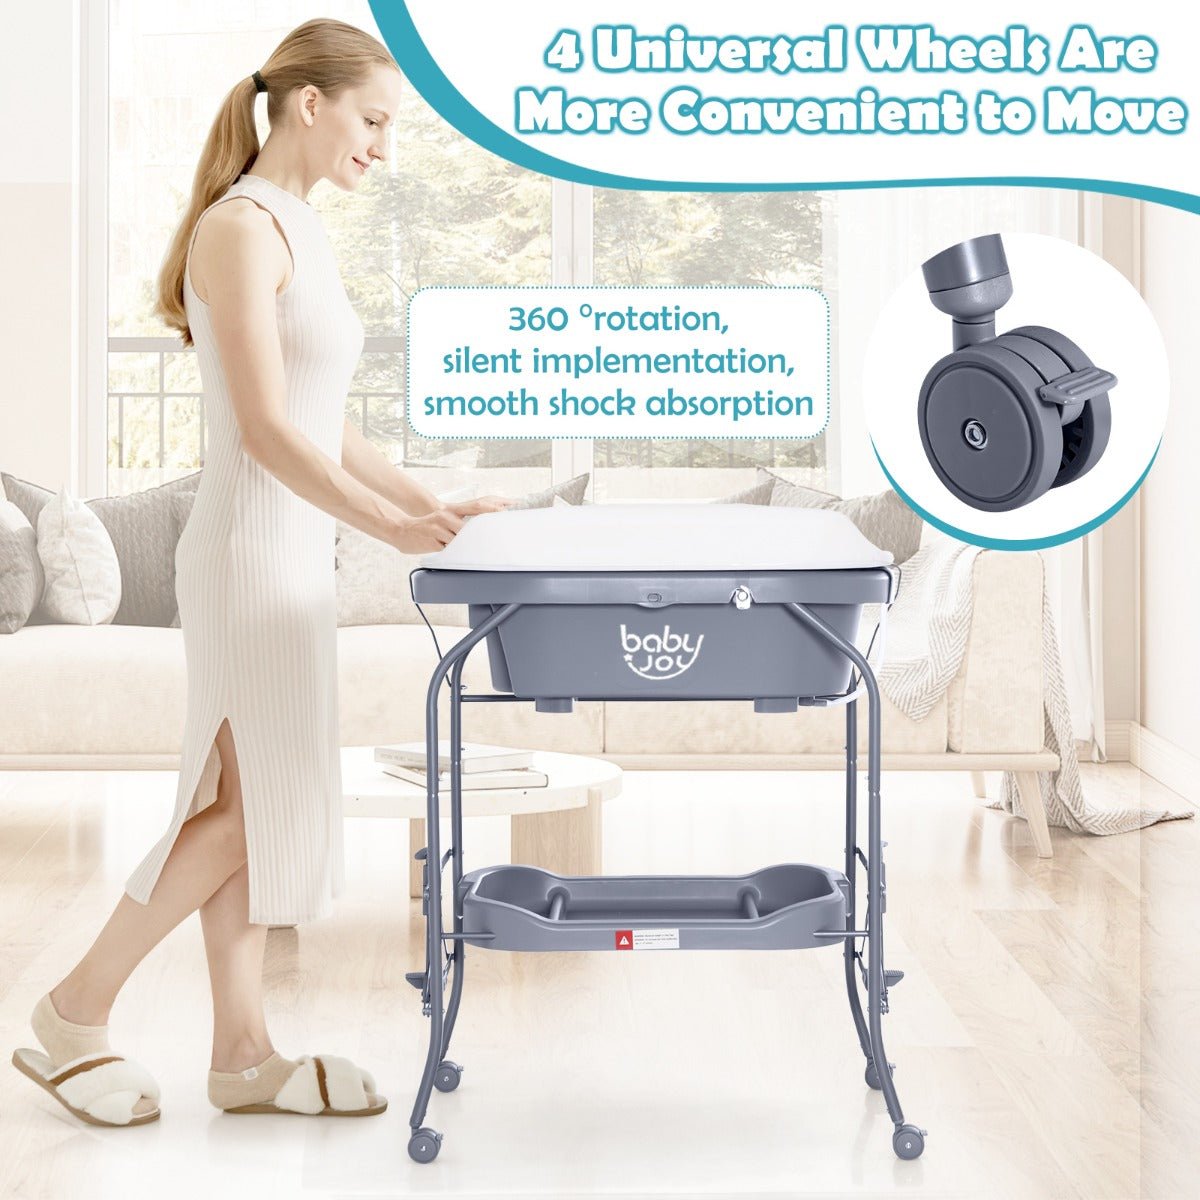 Experience Hassle-Free Baby Care with the 2 in 1 Changing Table